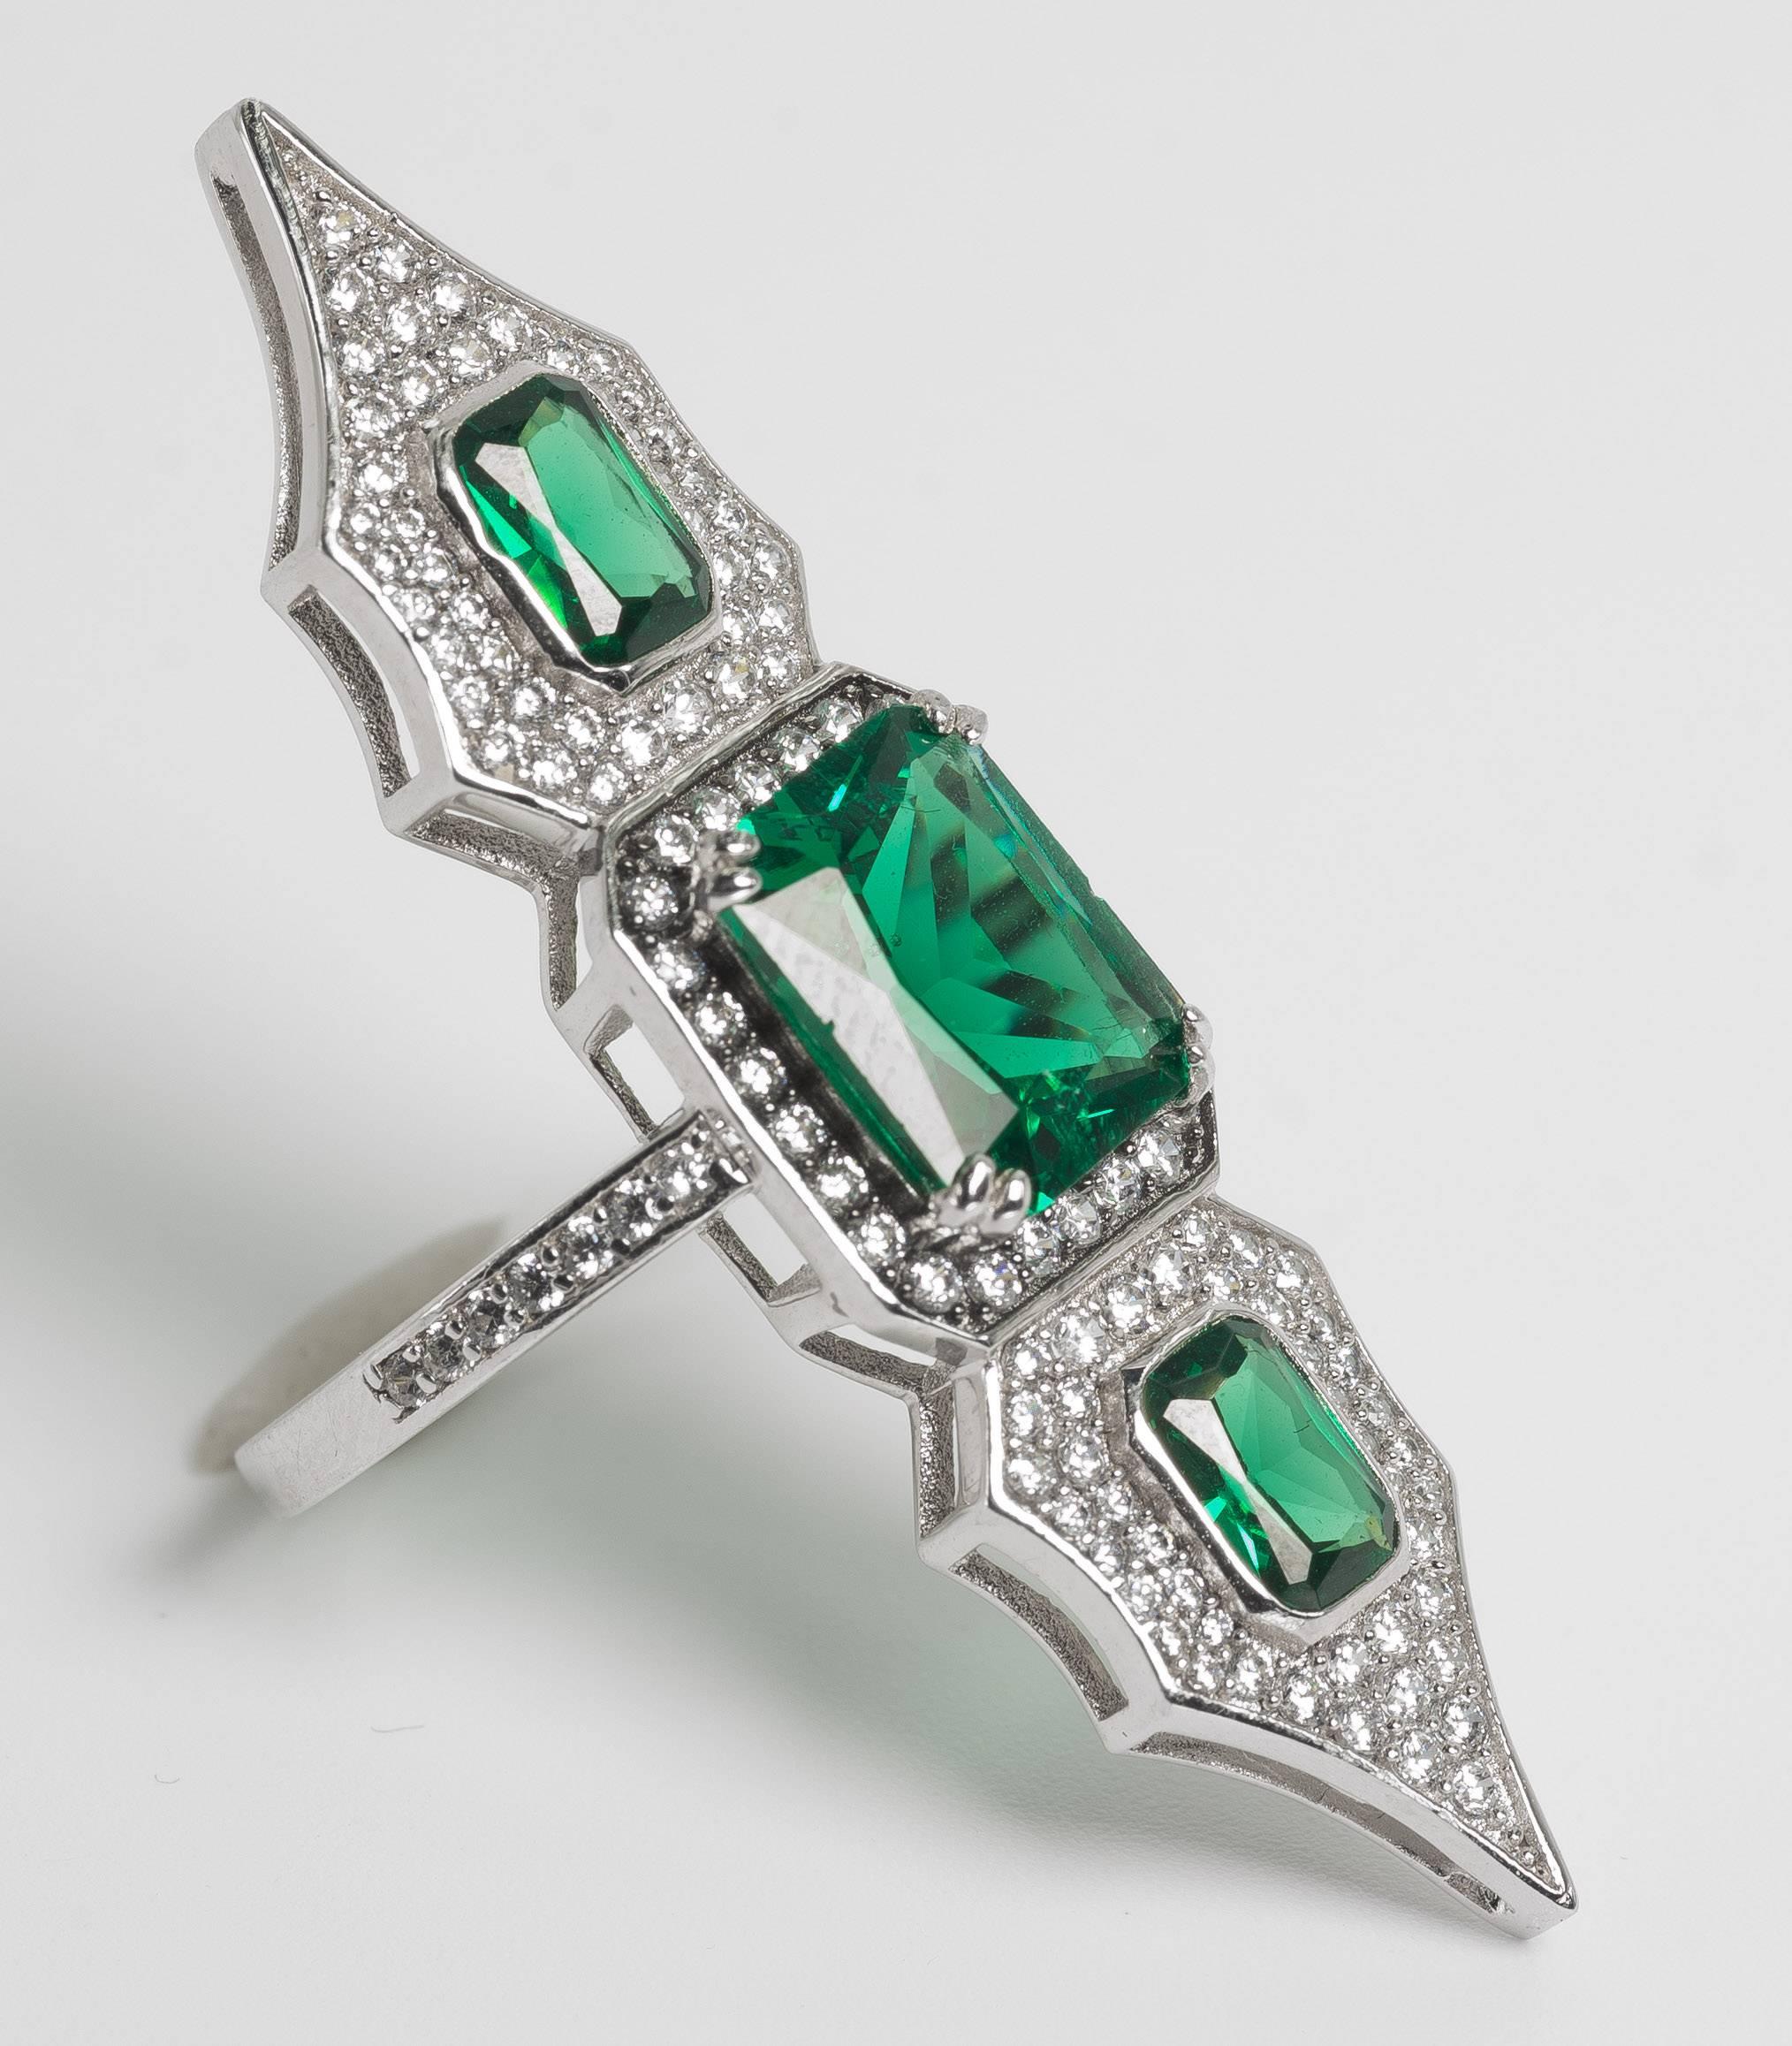 Elegant feminine faux diamond emerald arabesque sterling ring measures 2inches down the finger and 1/2inch wide. Sizing is free.